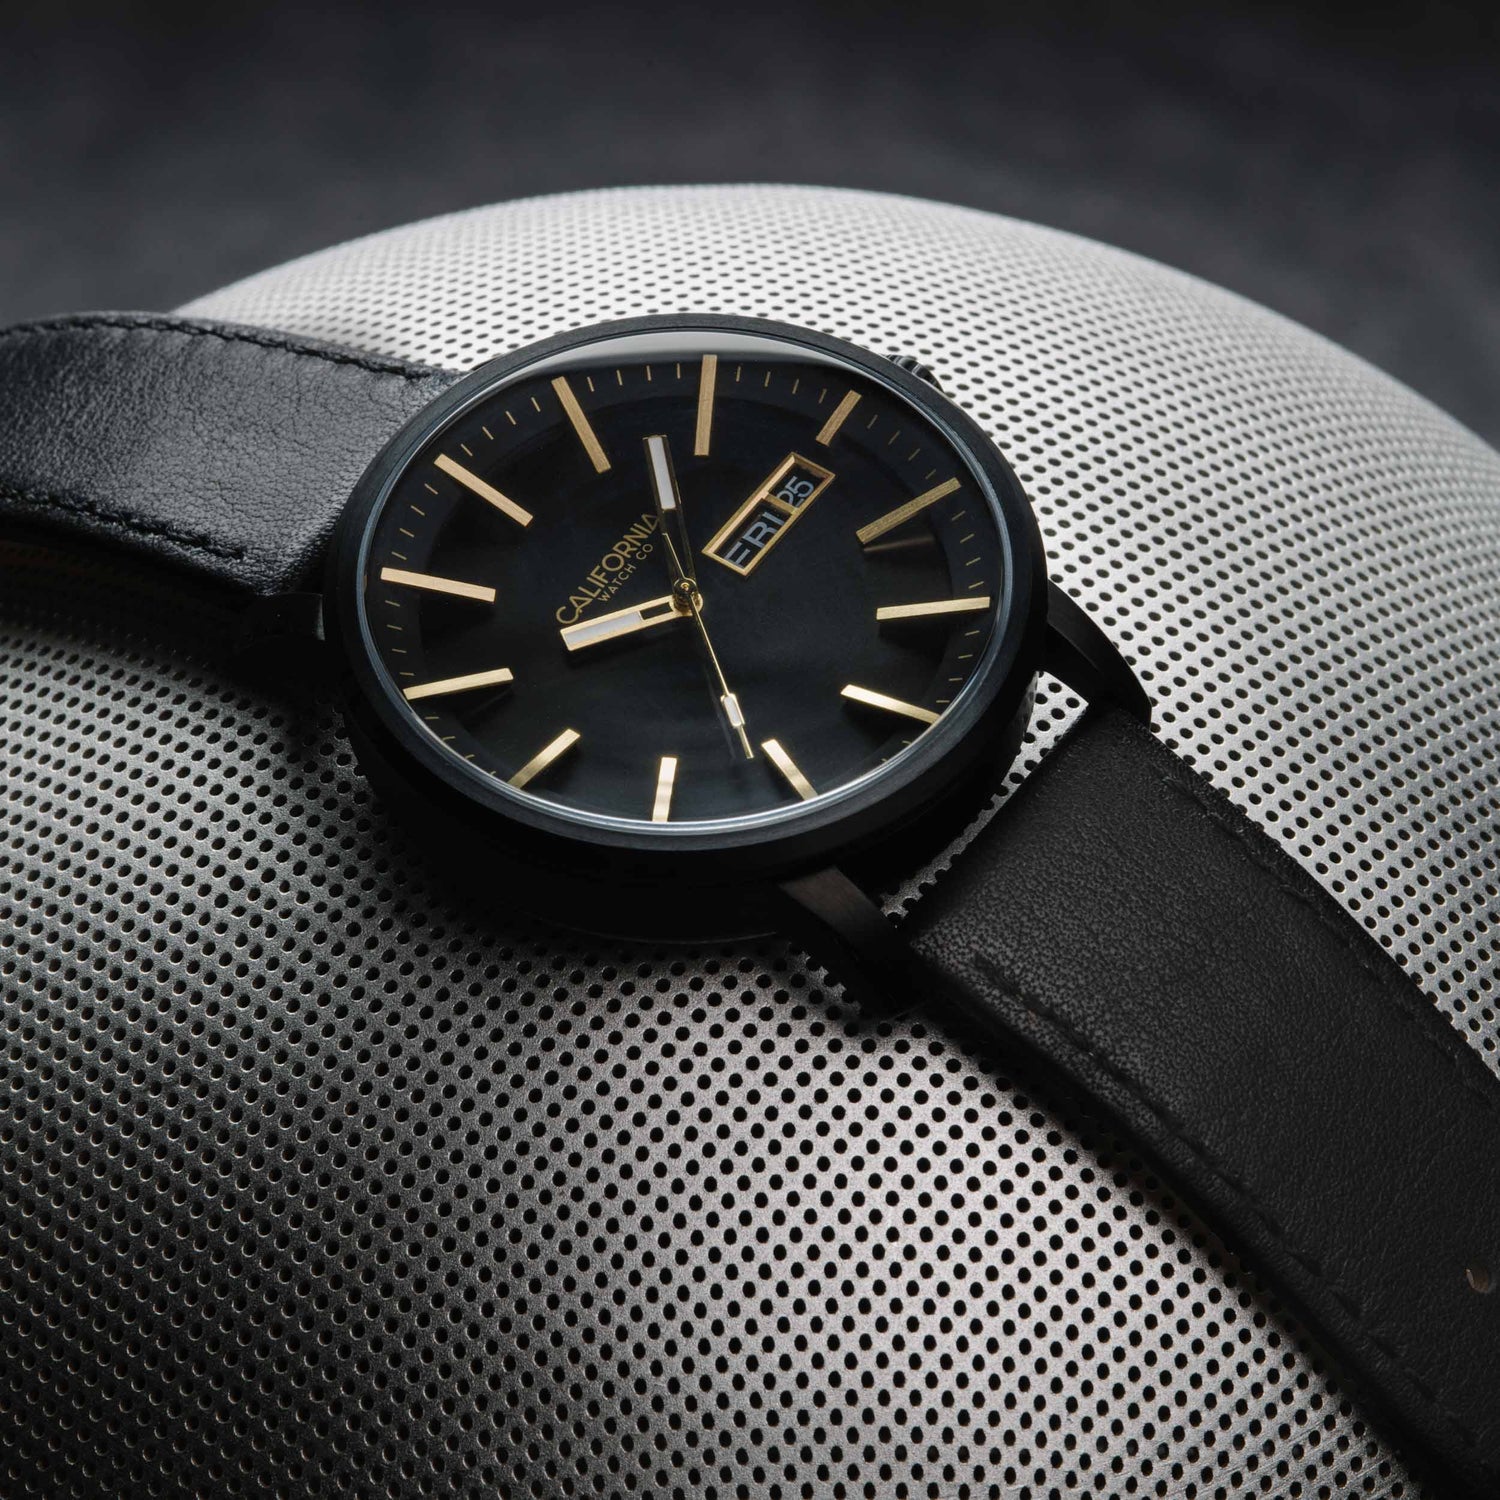 California Watch Co Mojave Leather All Black Gold